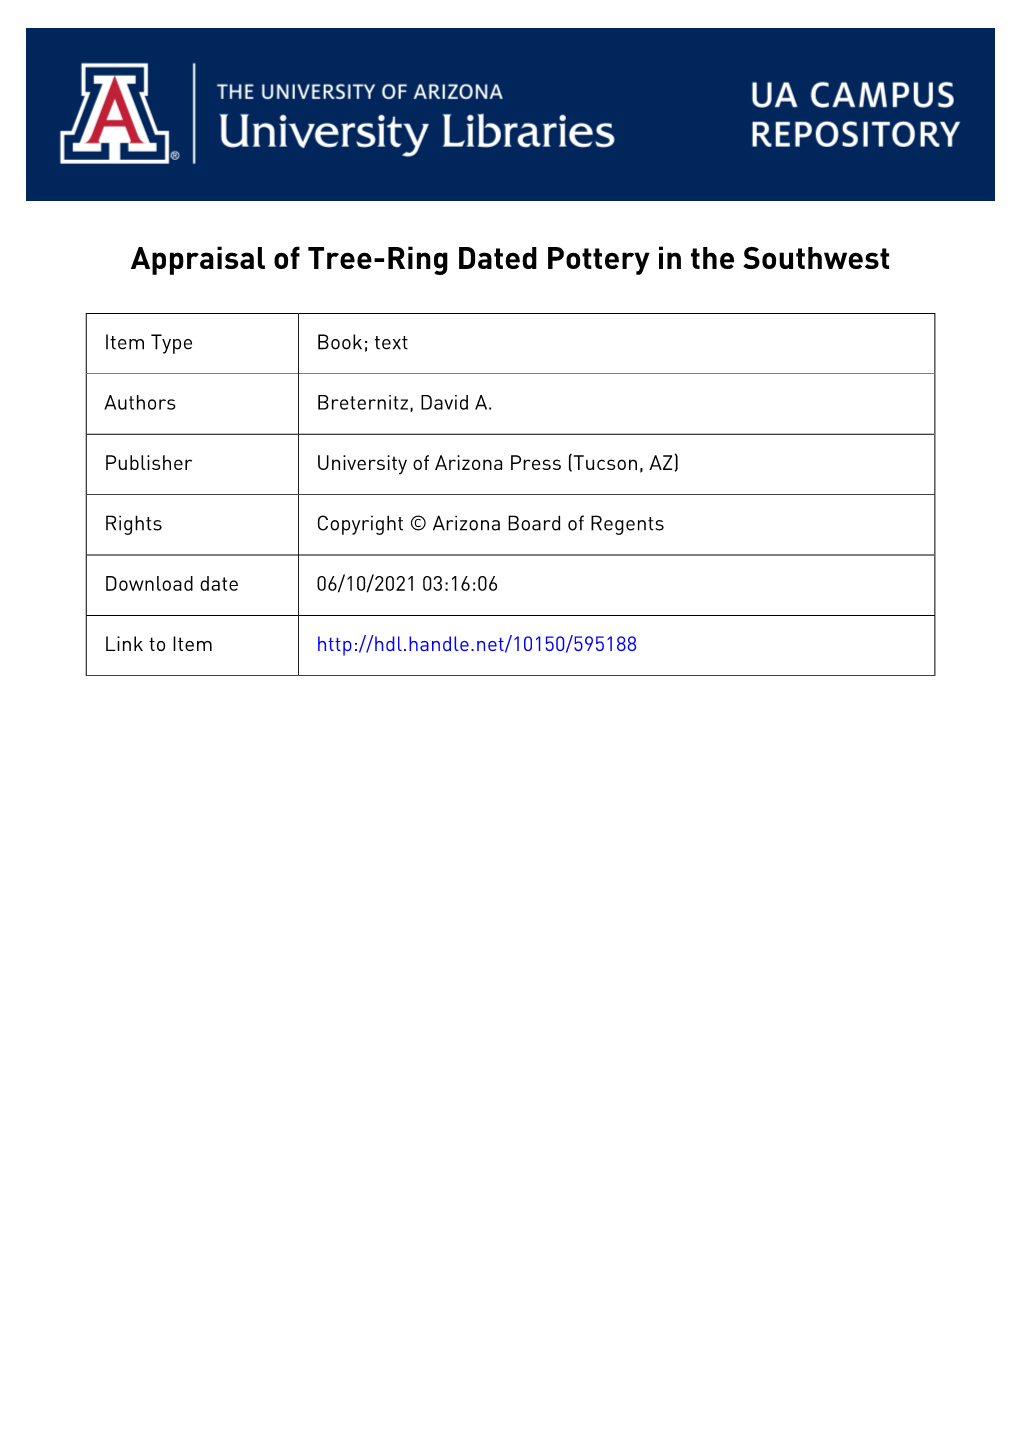 An Appraisal of Tree-Ring Dated Pottery in the Southwest